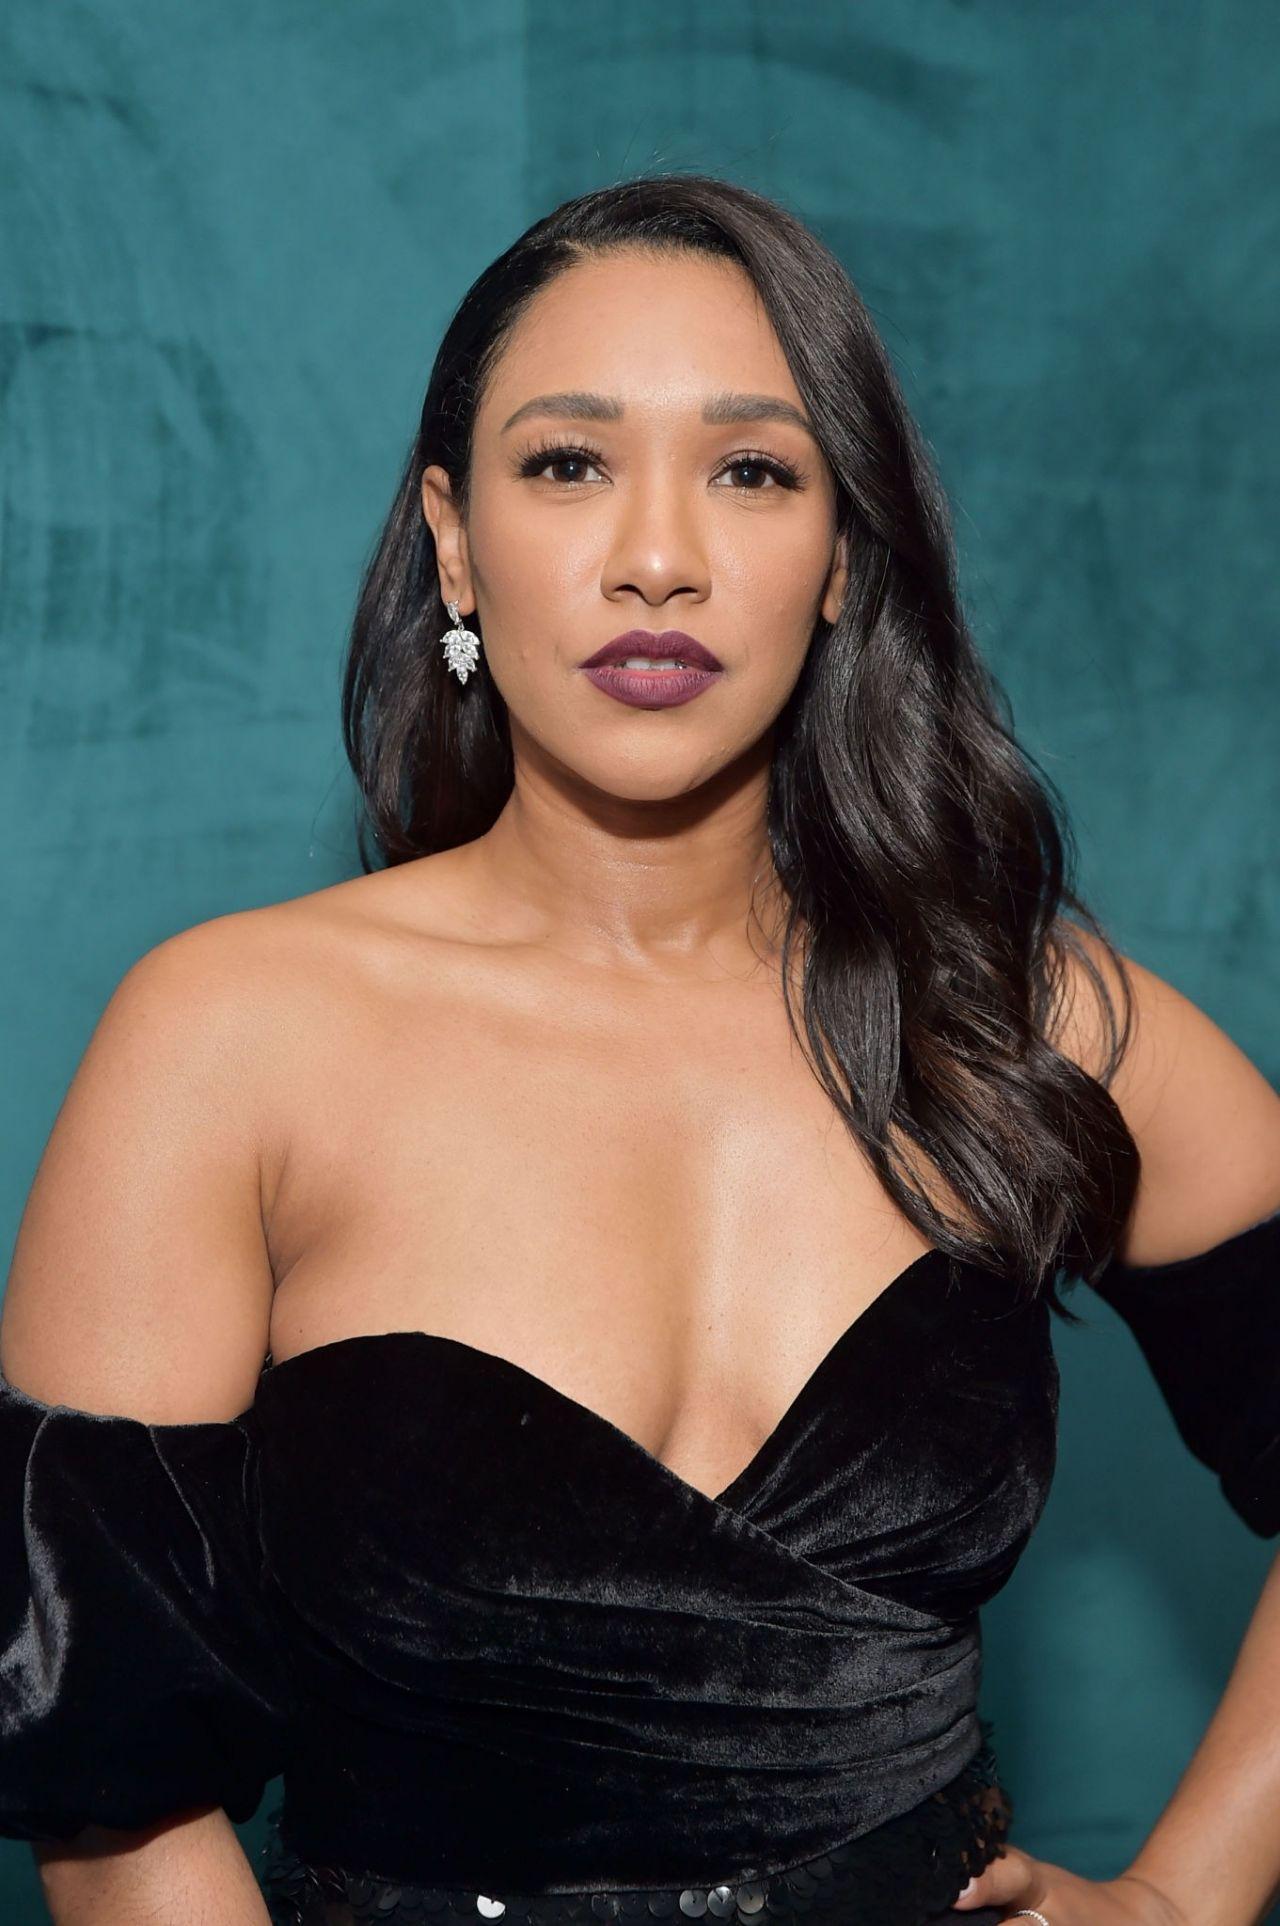 70+ Hot Pictures Of Candice Patton Who Plays Iris West In Flash TV Series 363